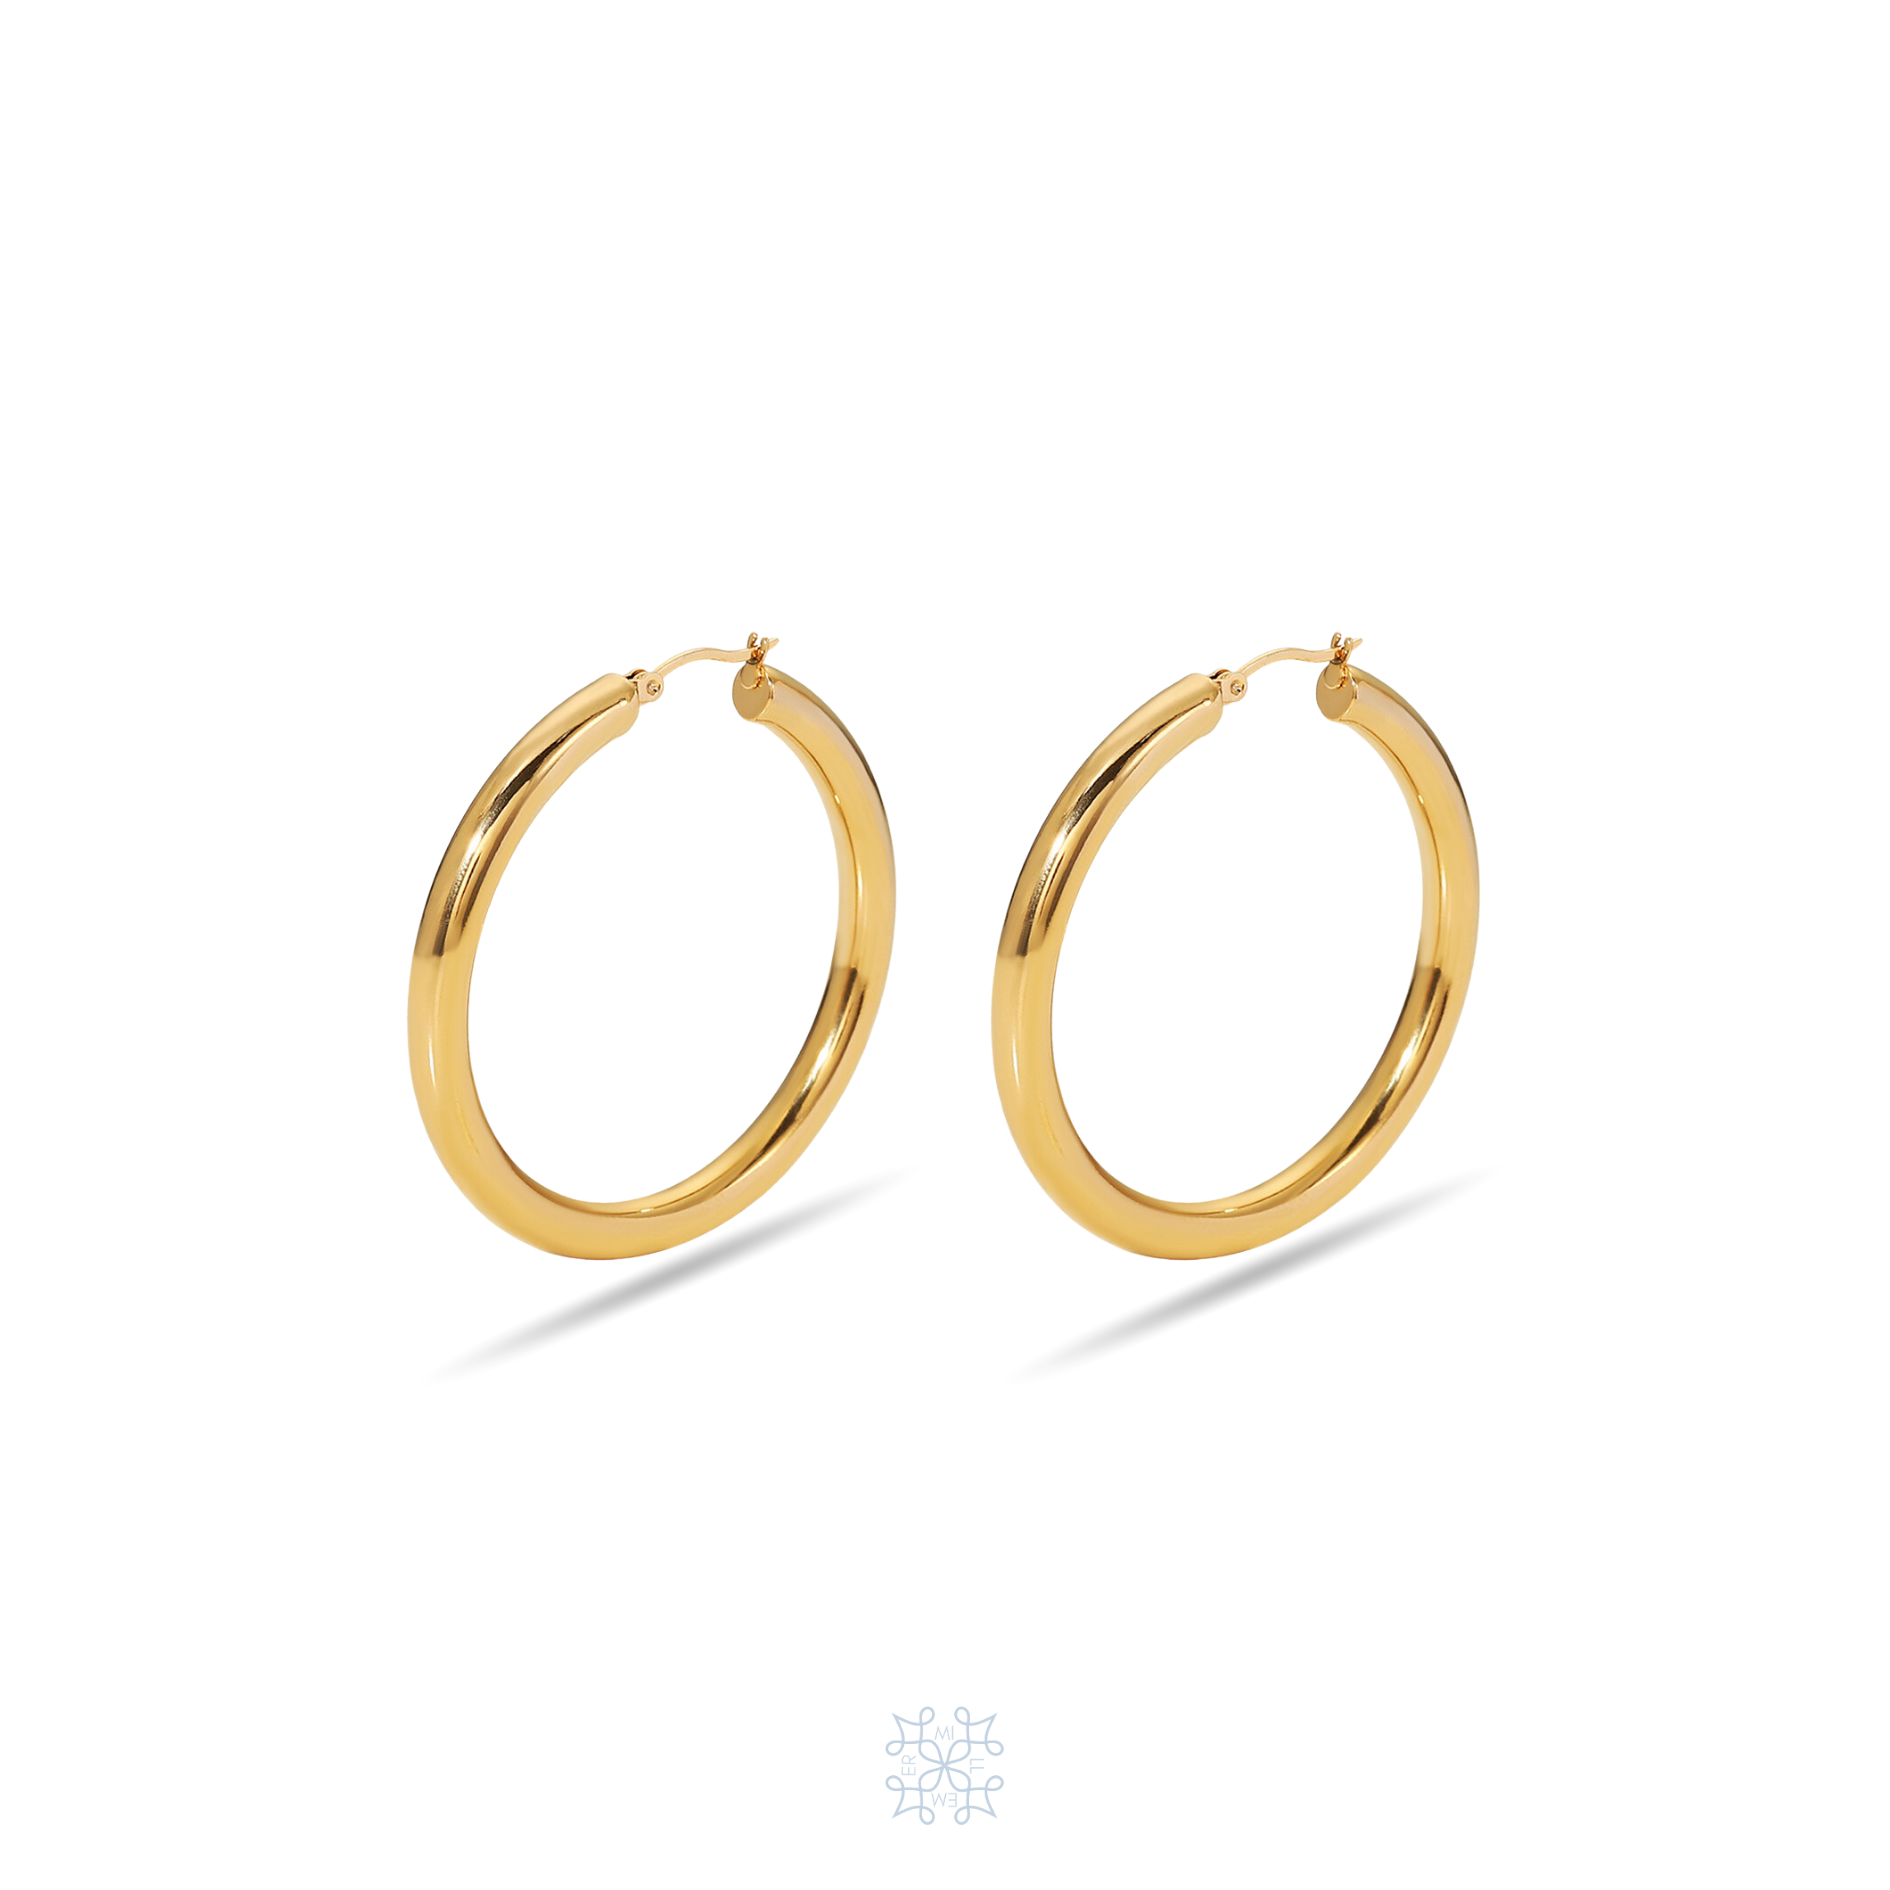 Classic Big Gold Hoops. Big Round circle Earrings plated in gold.